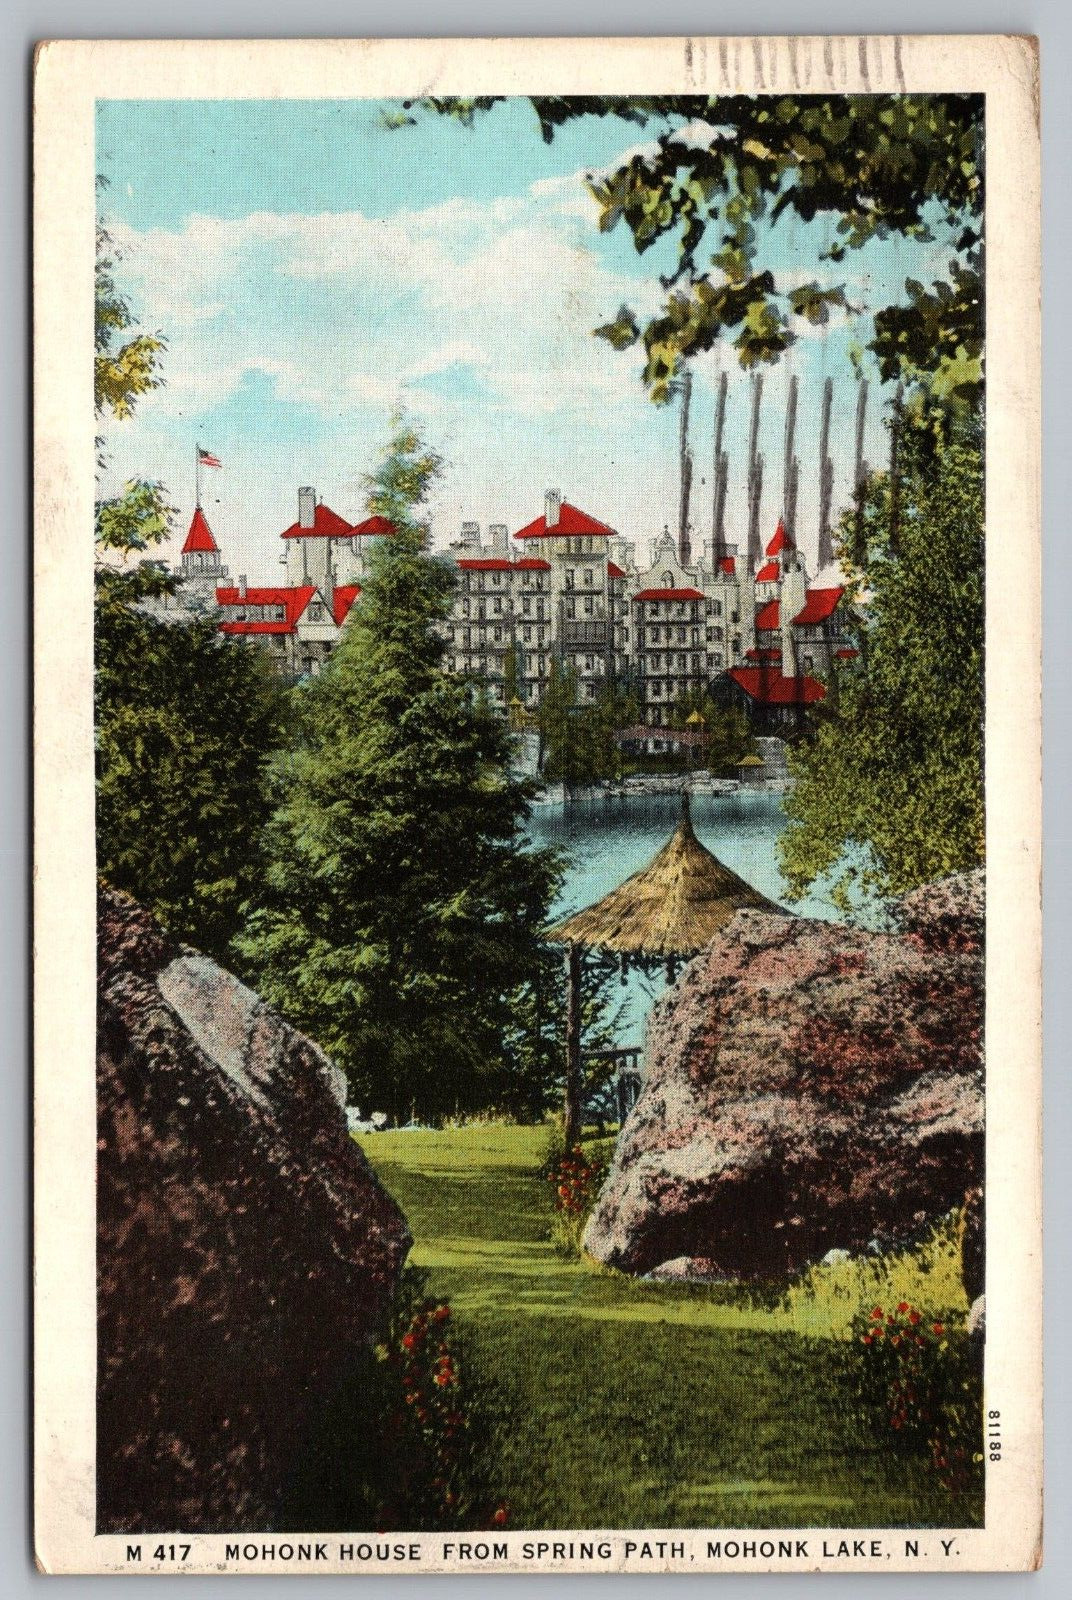 Mohonk House from Spring Path Mohonk Lake Marbletown NY New York Postcard